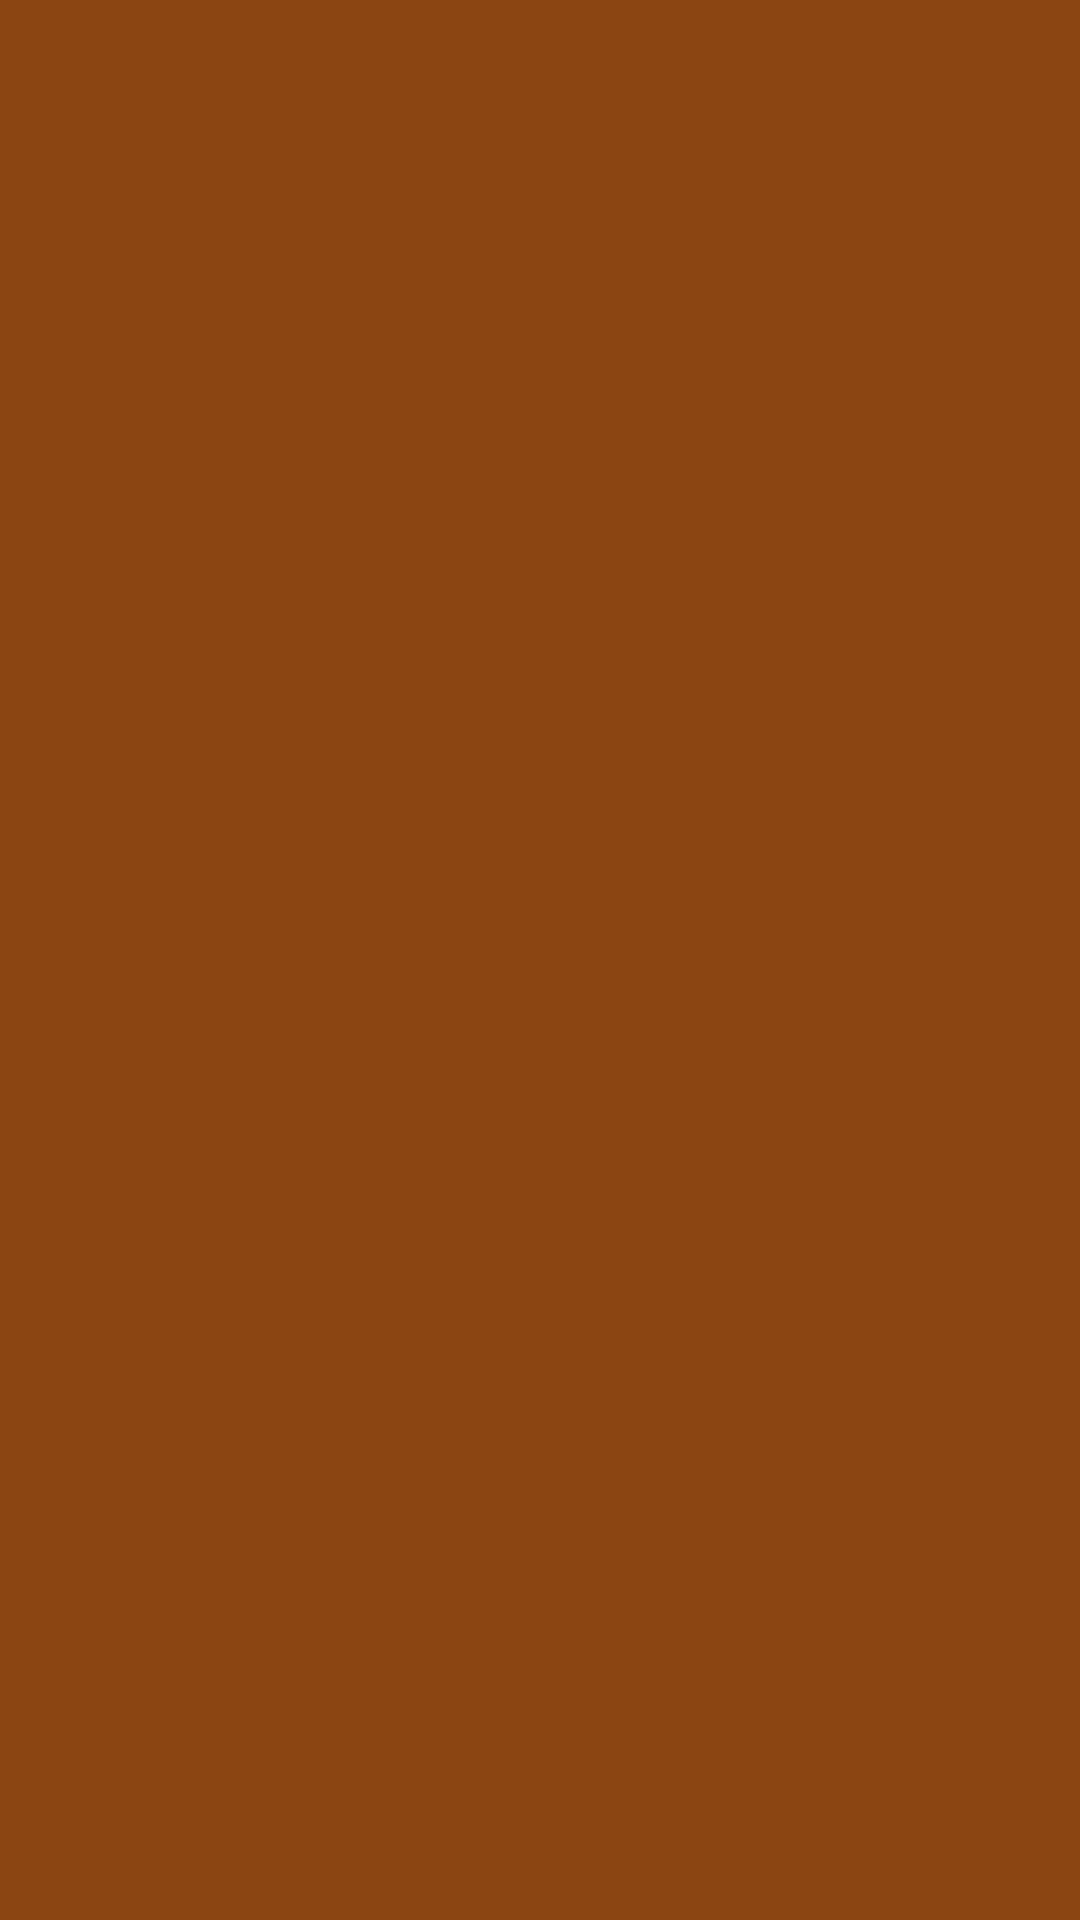 1080x1920 Saddle Brown Solid Color Background